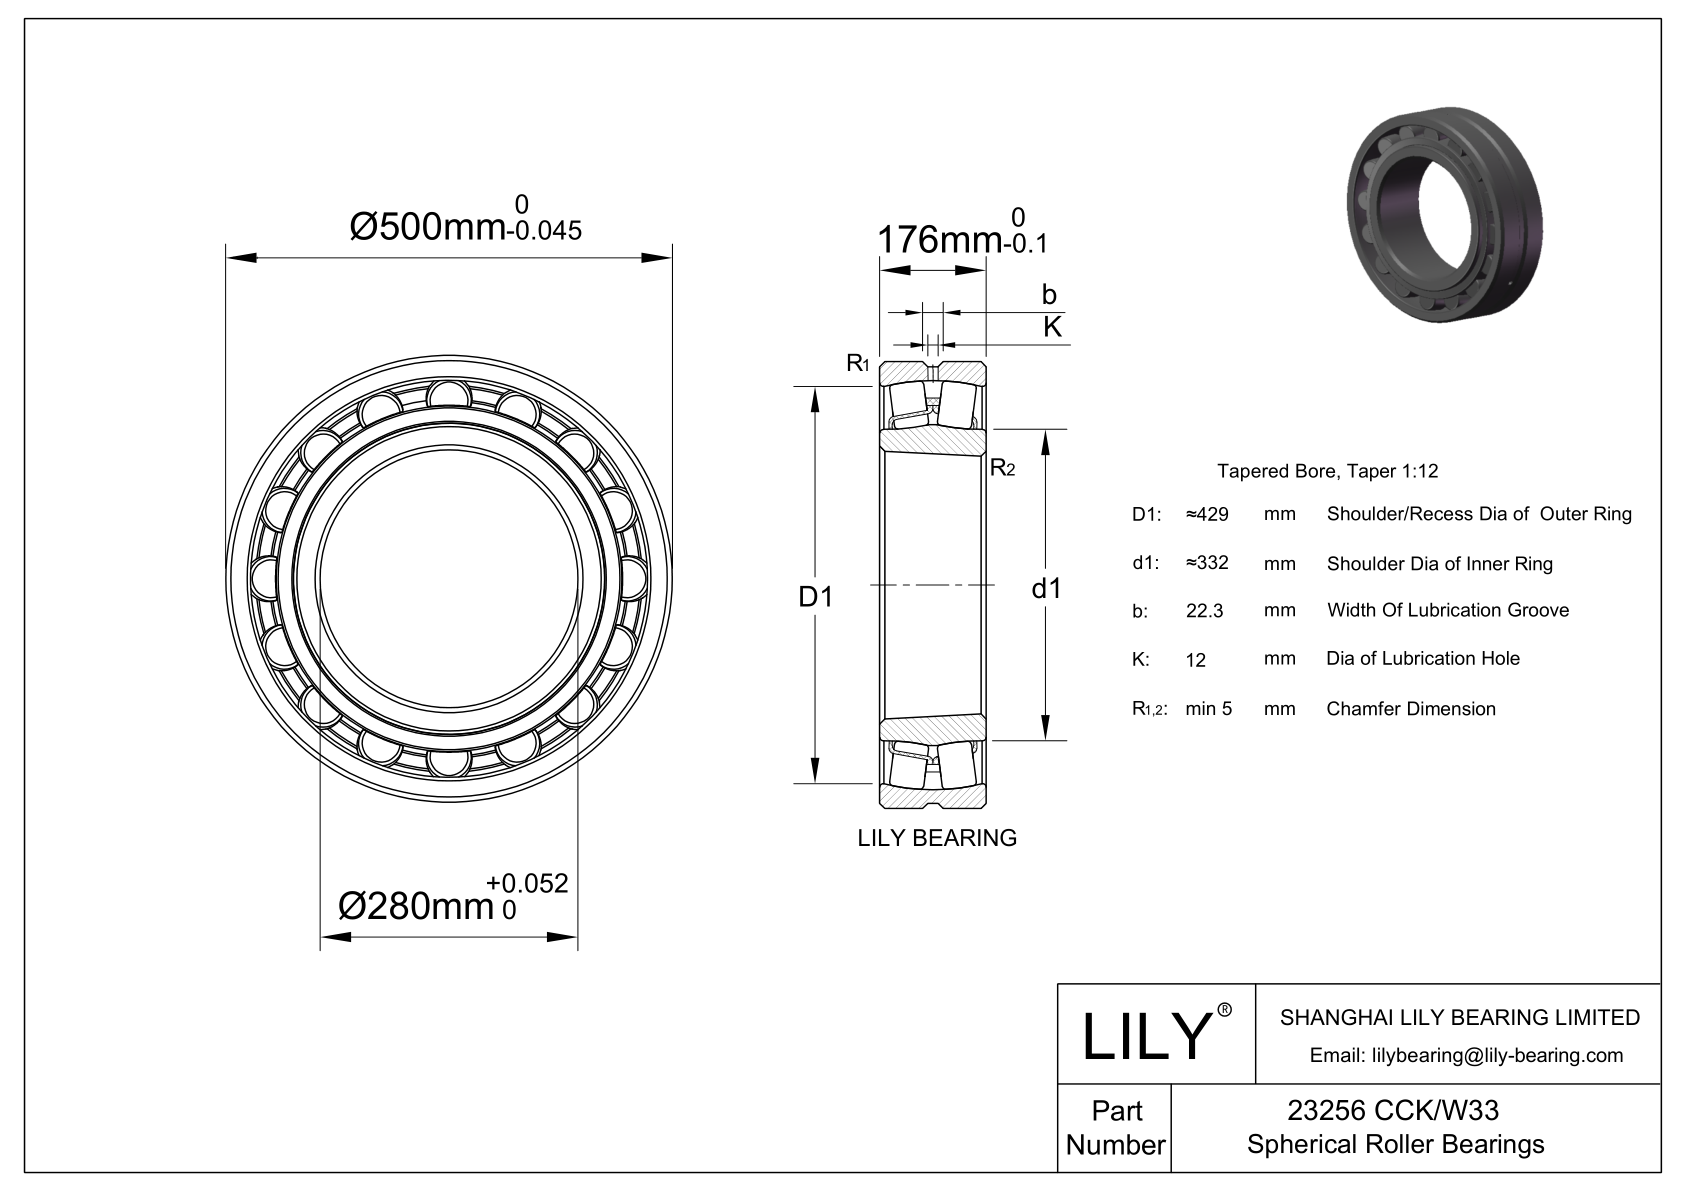 23256 CCK/W33 Double Row Spherical Roller Bearing cad drawing